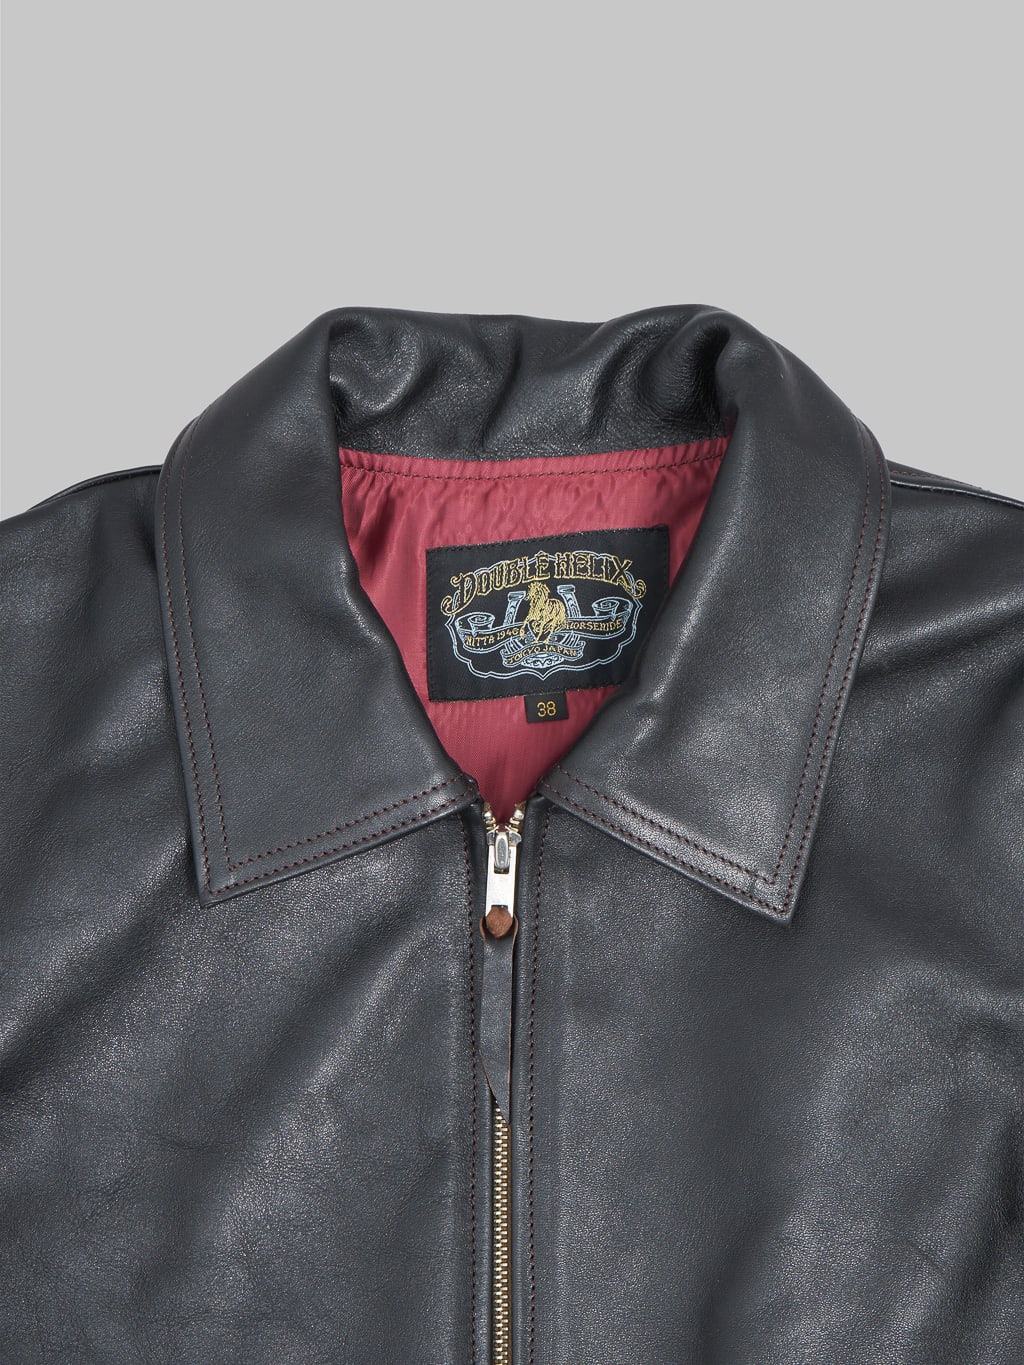 double helix dodecagon riders horsehide jacket black chest closeup